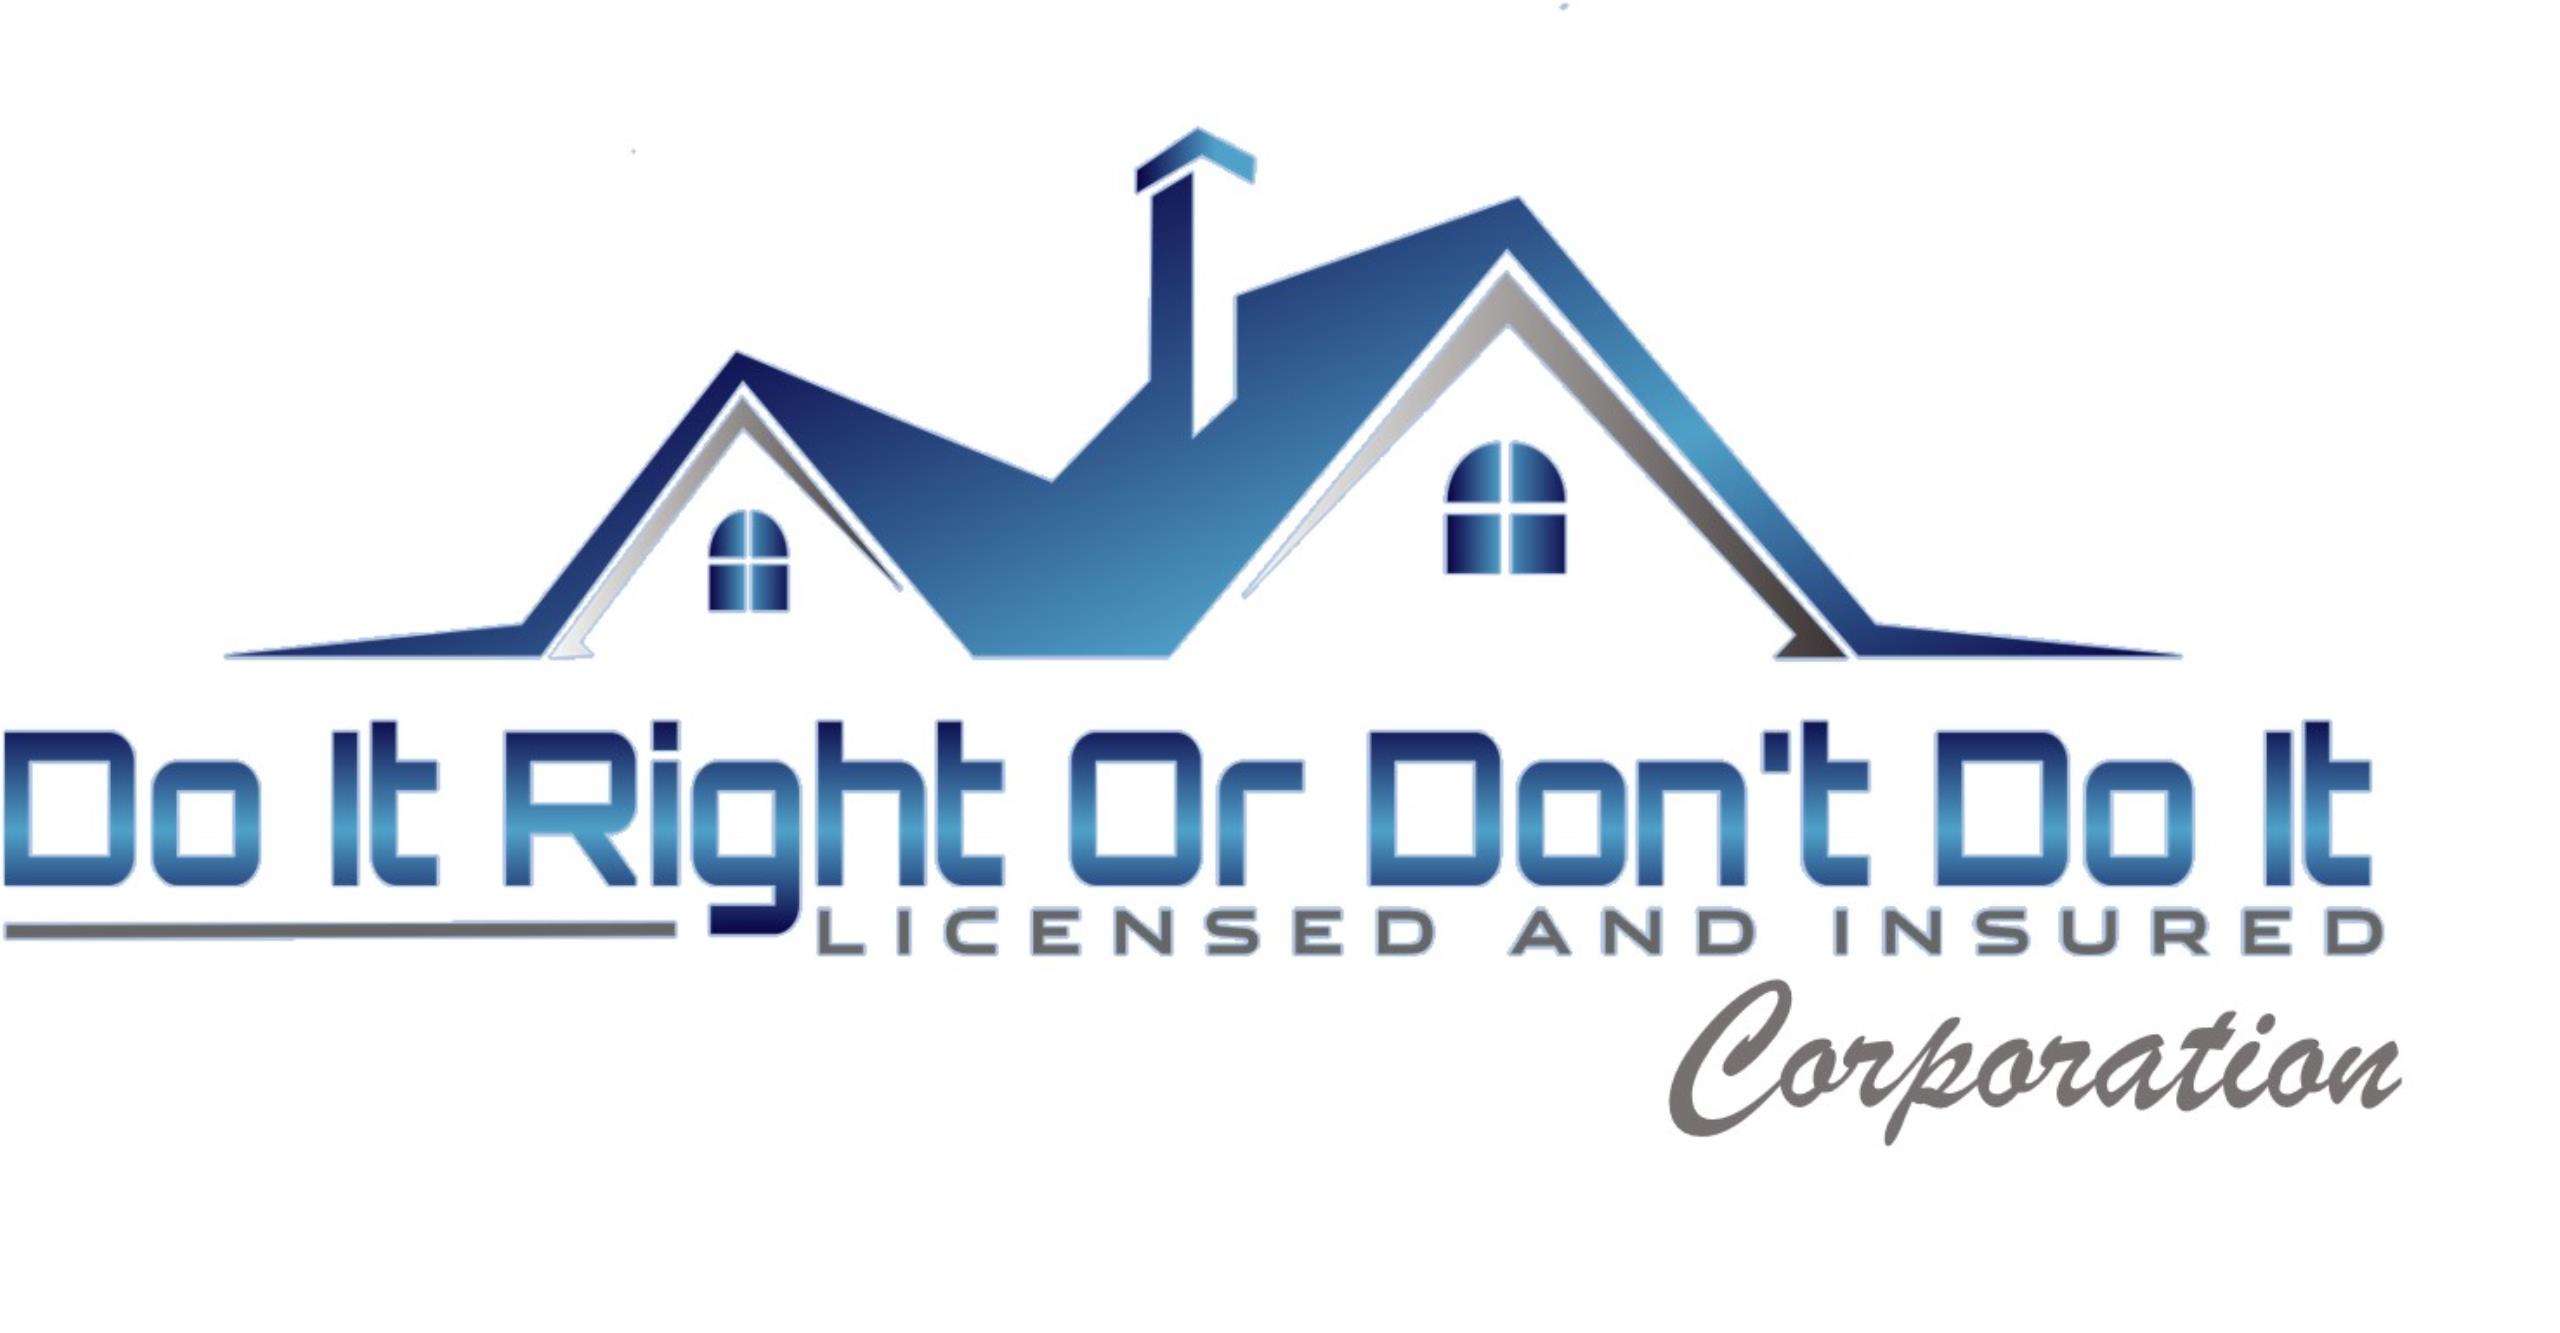 Do It Right Or Don't Do It Corp. Logo